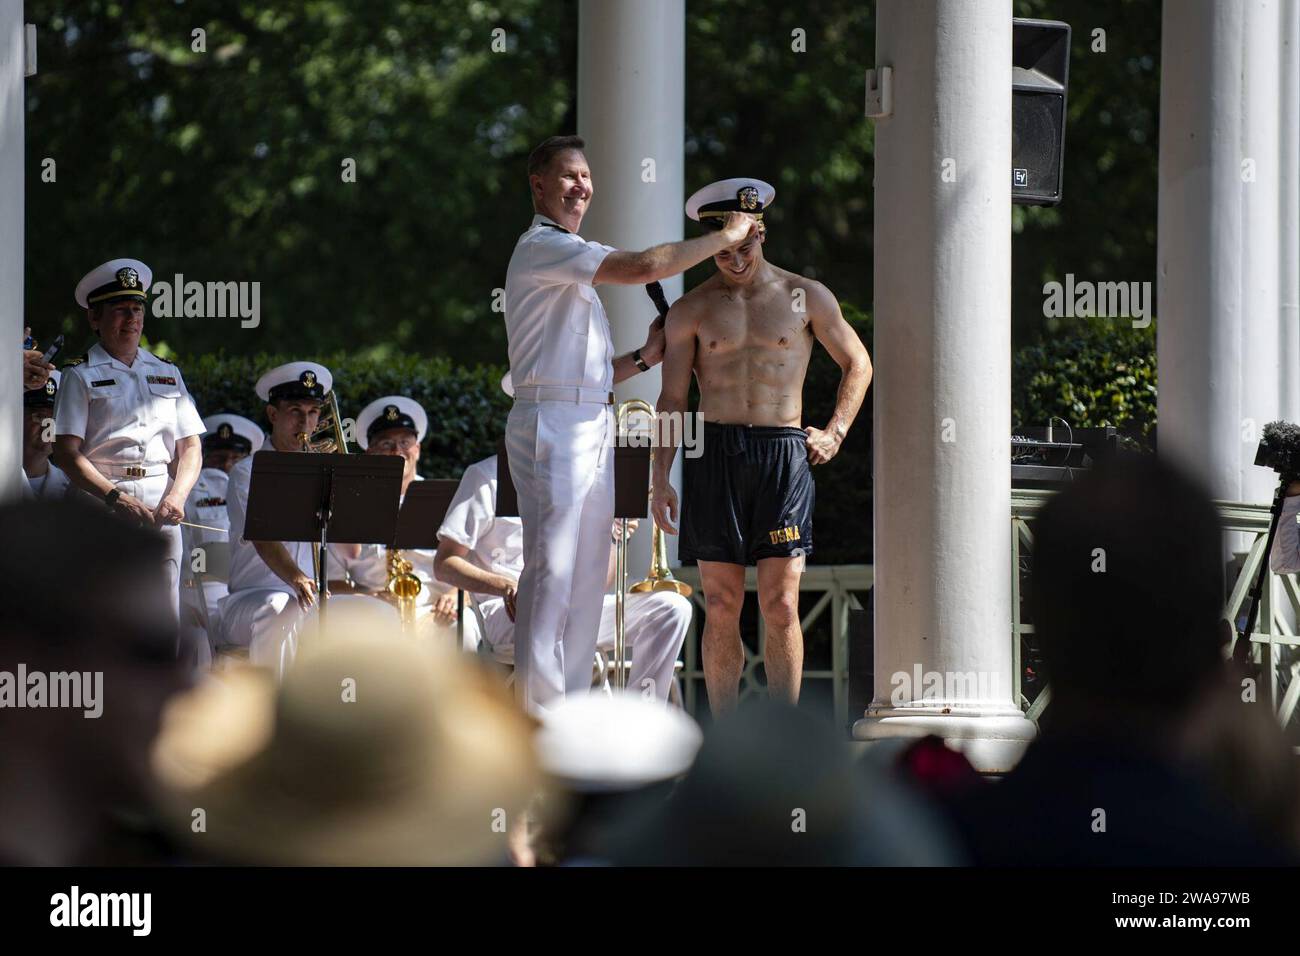 US military forces. ANNAPOLIS, Md. (May 21, 2018) Vice Adm. Ted Carter, superintendent of the U.S. Naval Academy, congratulates Midshipman 4th Class Peter Rossi, from Phoenix, Az., after the Herndon Climb. Each year, the roughly 1,000 members of the academy's plebe class form a human pyramid around the 21-foot Herndon Monument to remove a plebe hat, or Dixie cup, that upperclassmen have placed on the top of the obelisk monument which is covered in lard. (U.S. Navy photo by Mass Communication Specialist 3rd Class Kaitlin Rowell/Released) Stock Photo